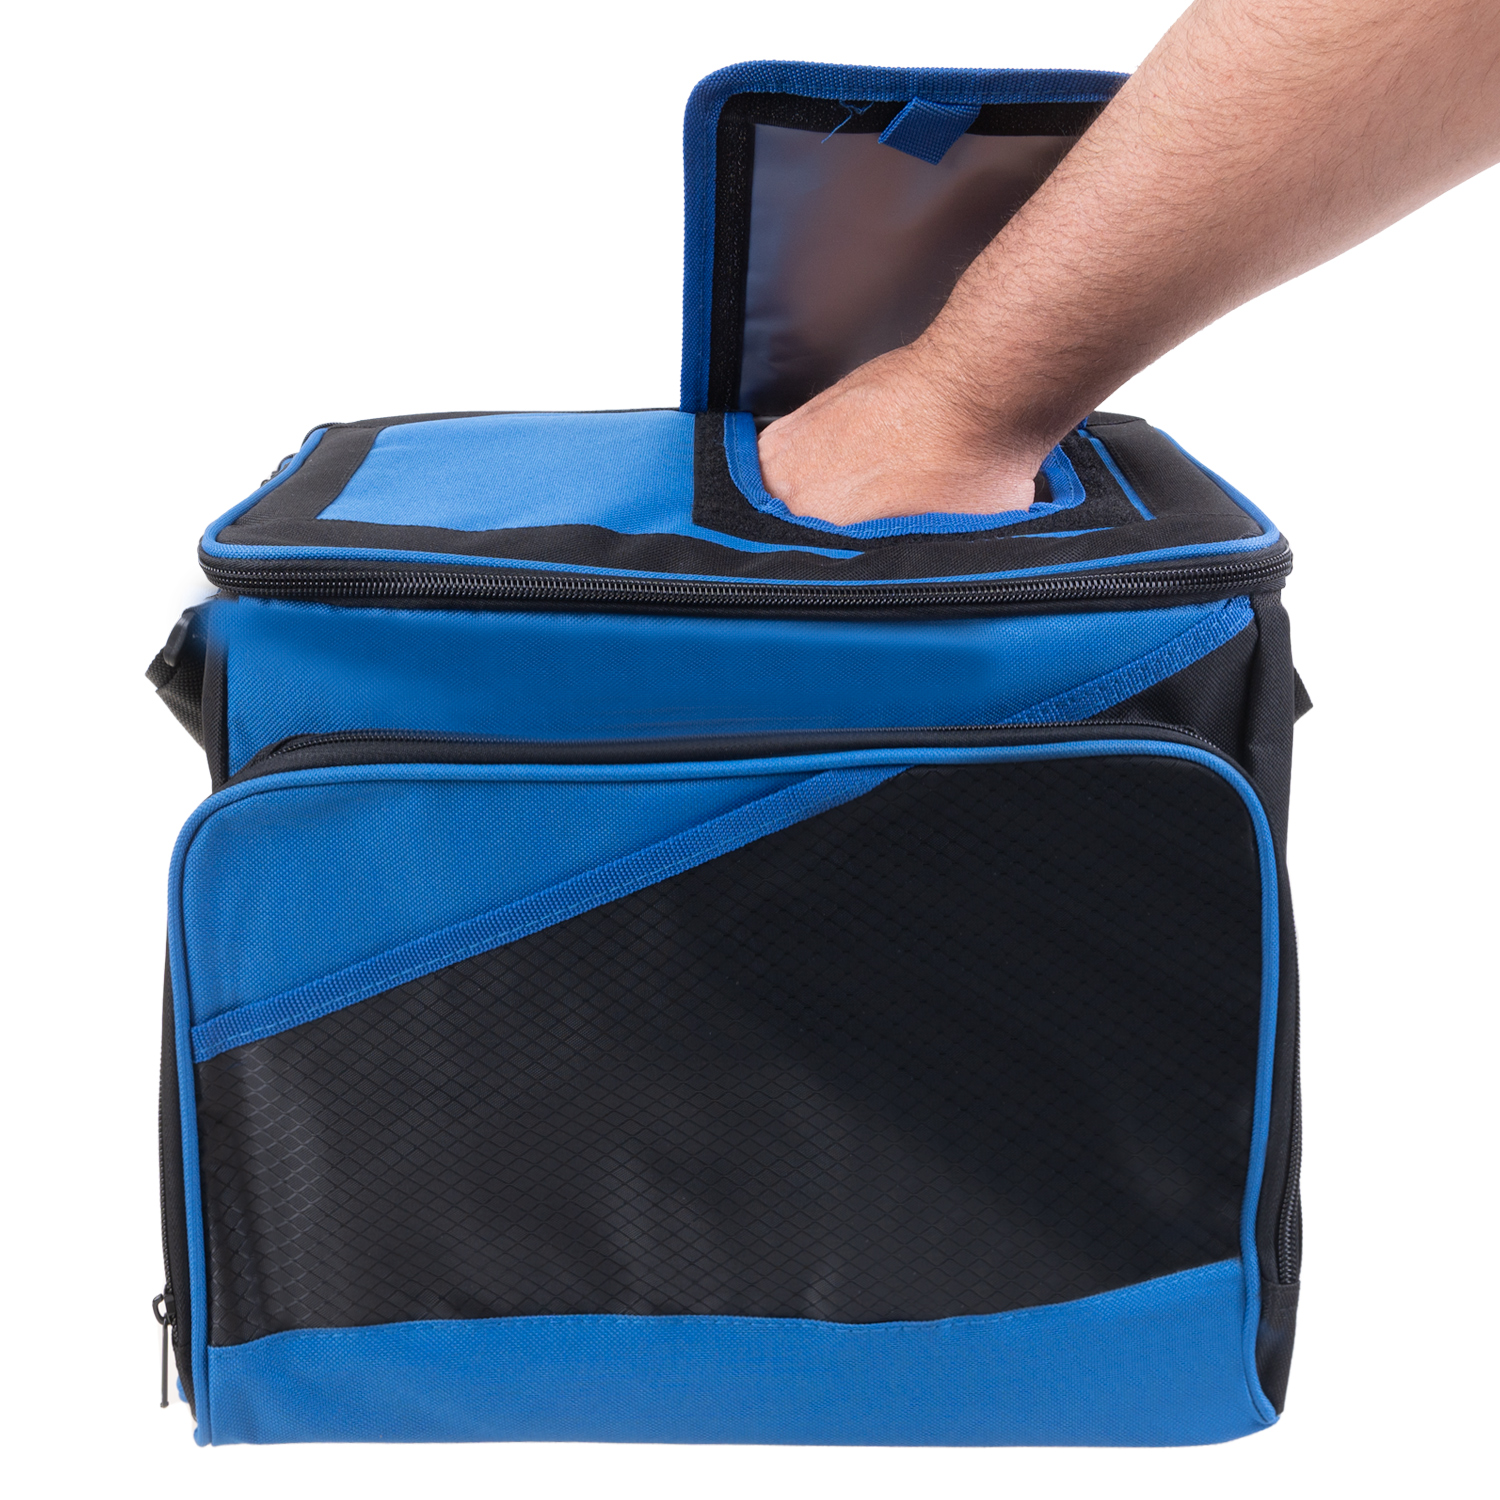 https://www.rossy.ca/media/A2W/products/large-insulated-cooler-bag-24-can-capacity-blue-75840-2.jpg